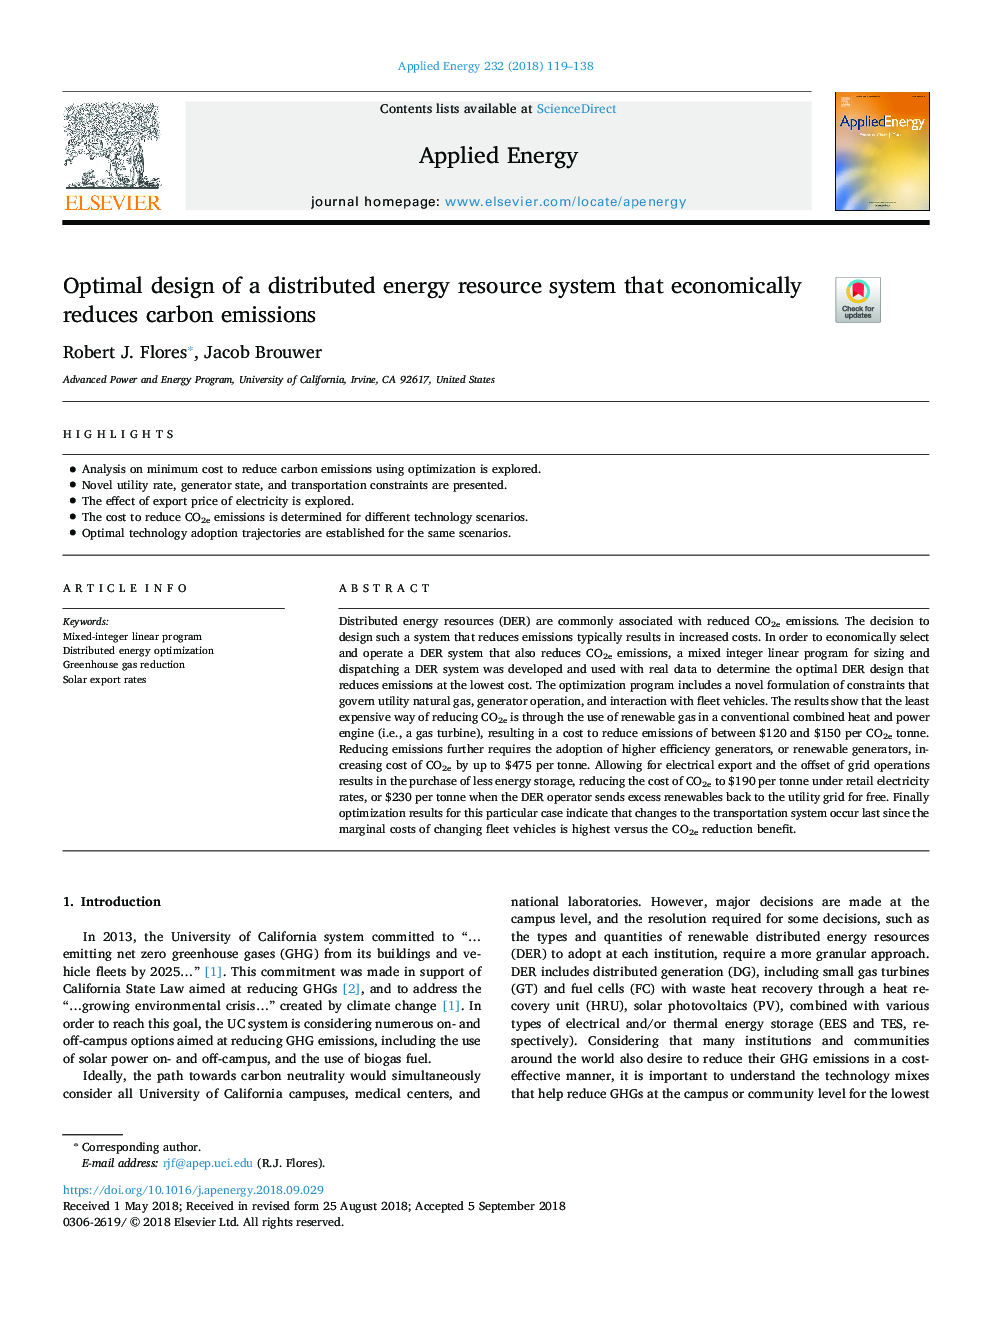 Optimal design of a distributed energy resource system that economically reduces carbon emissions